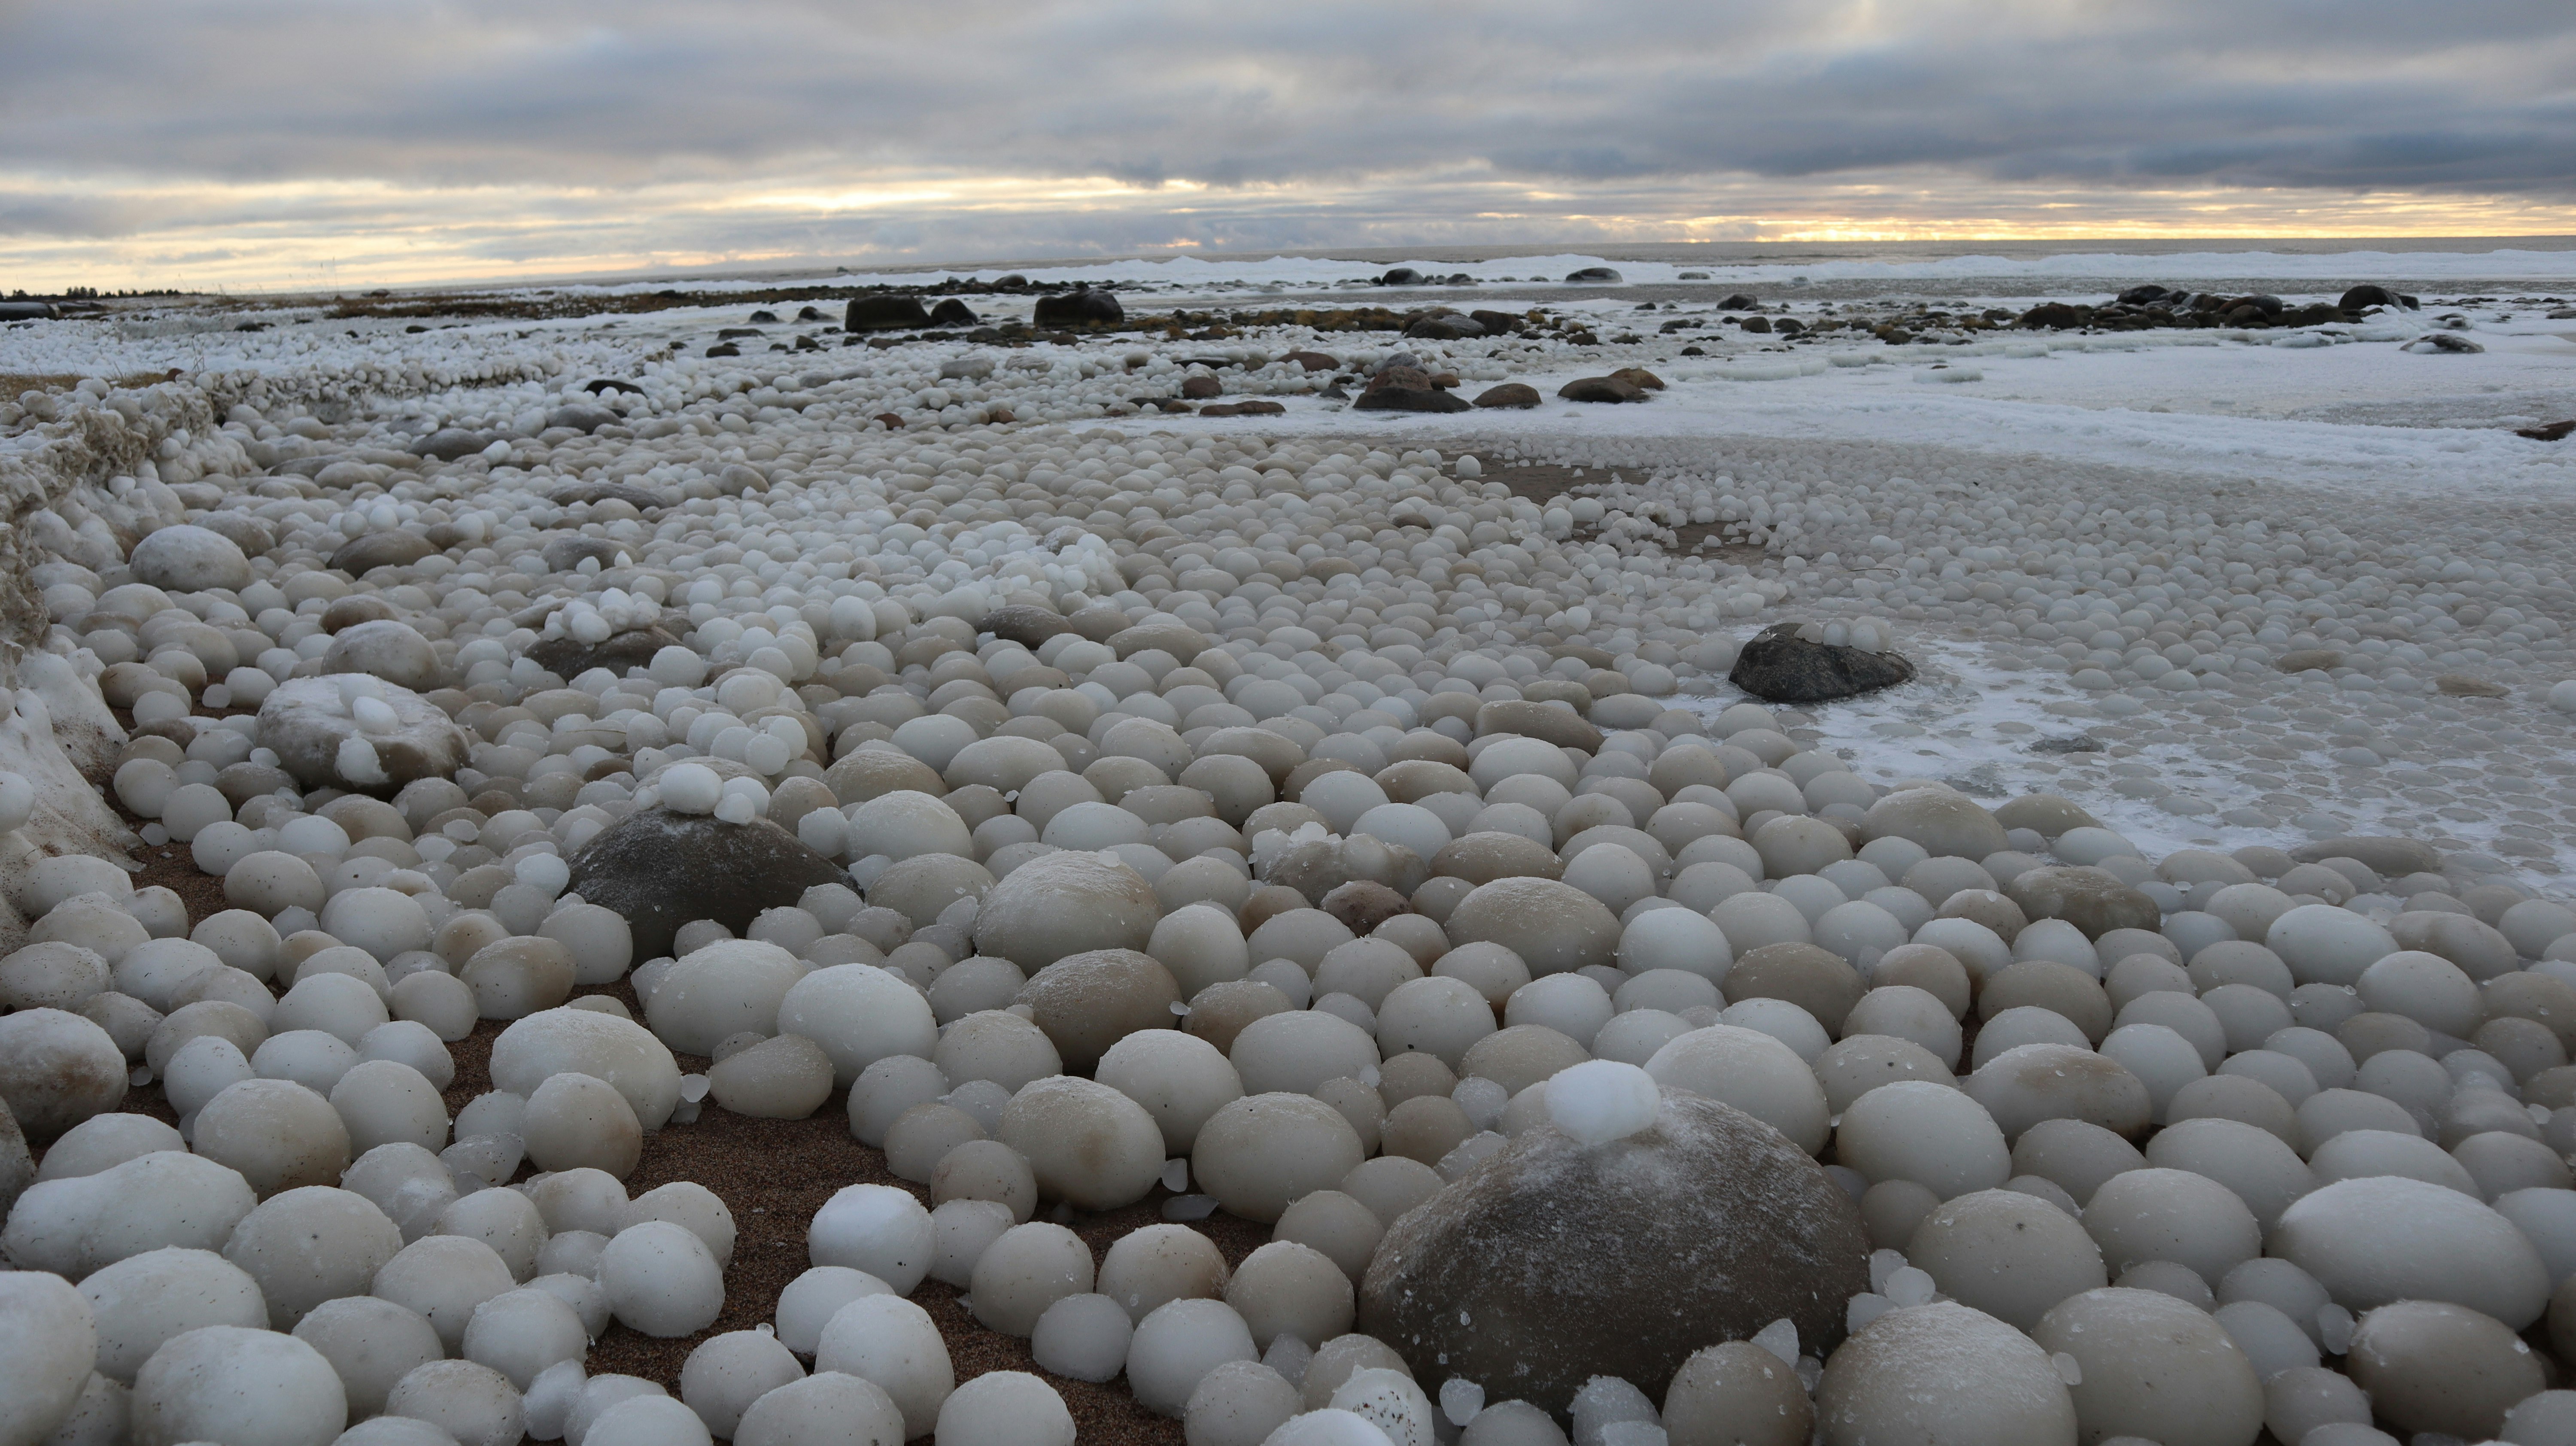 An image of the ice balls on the beach.JPG